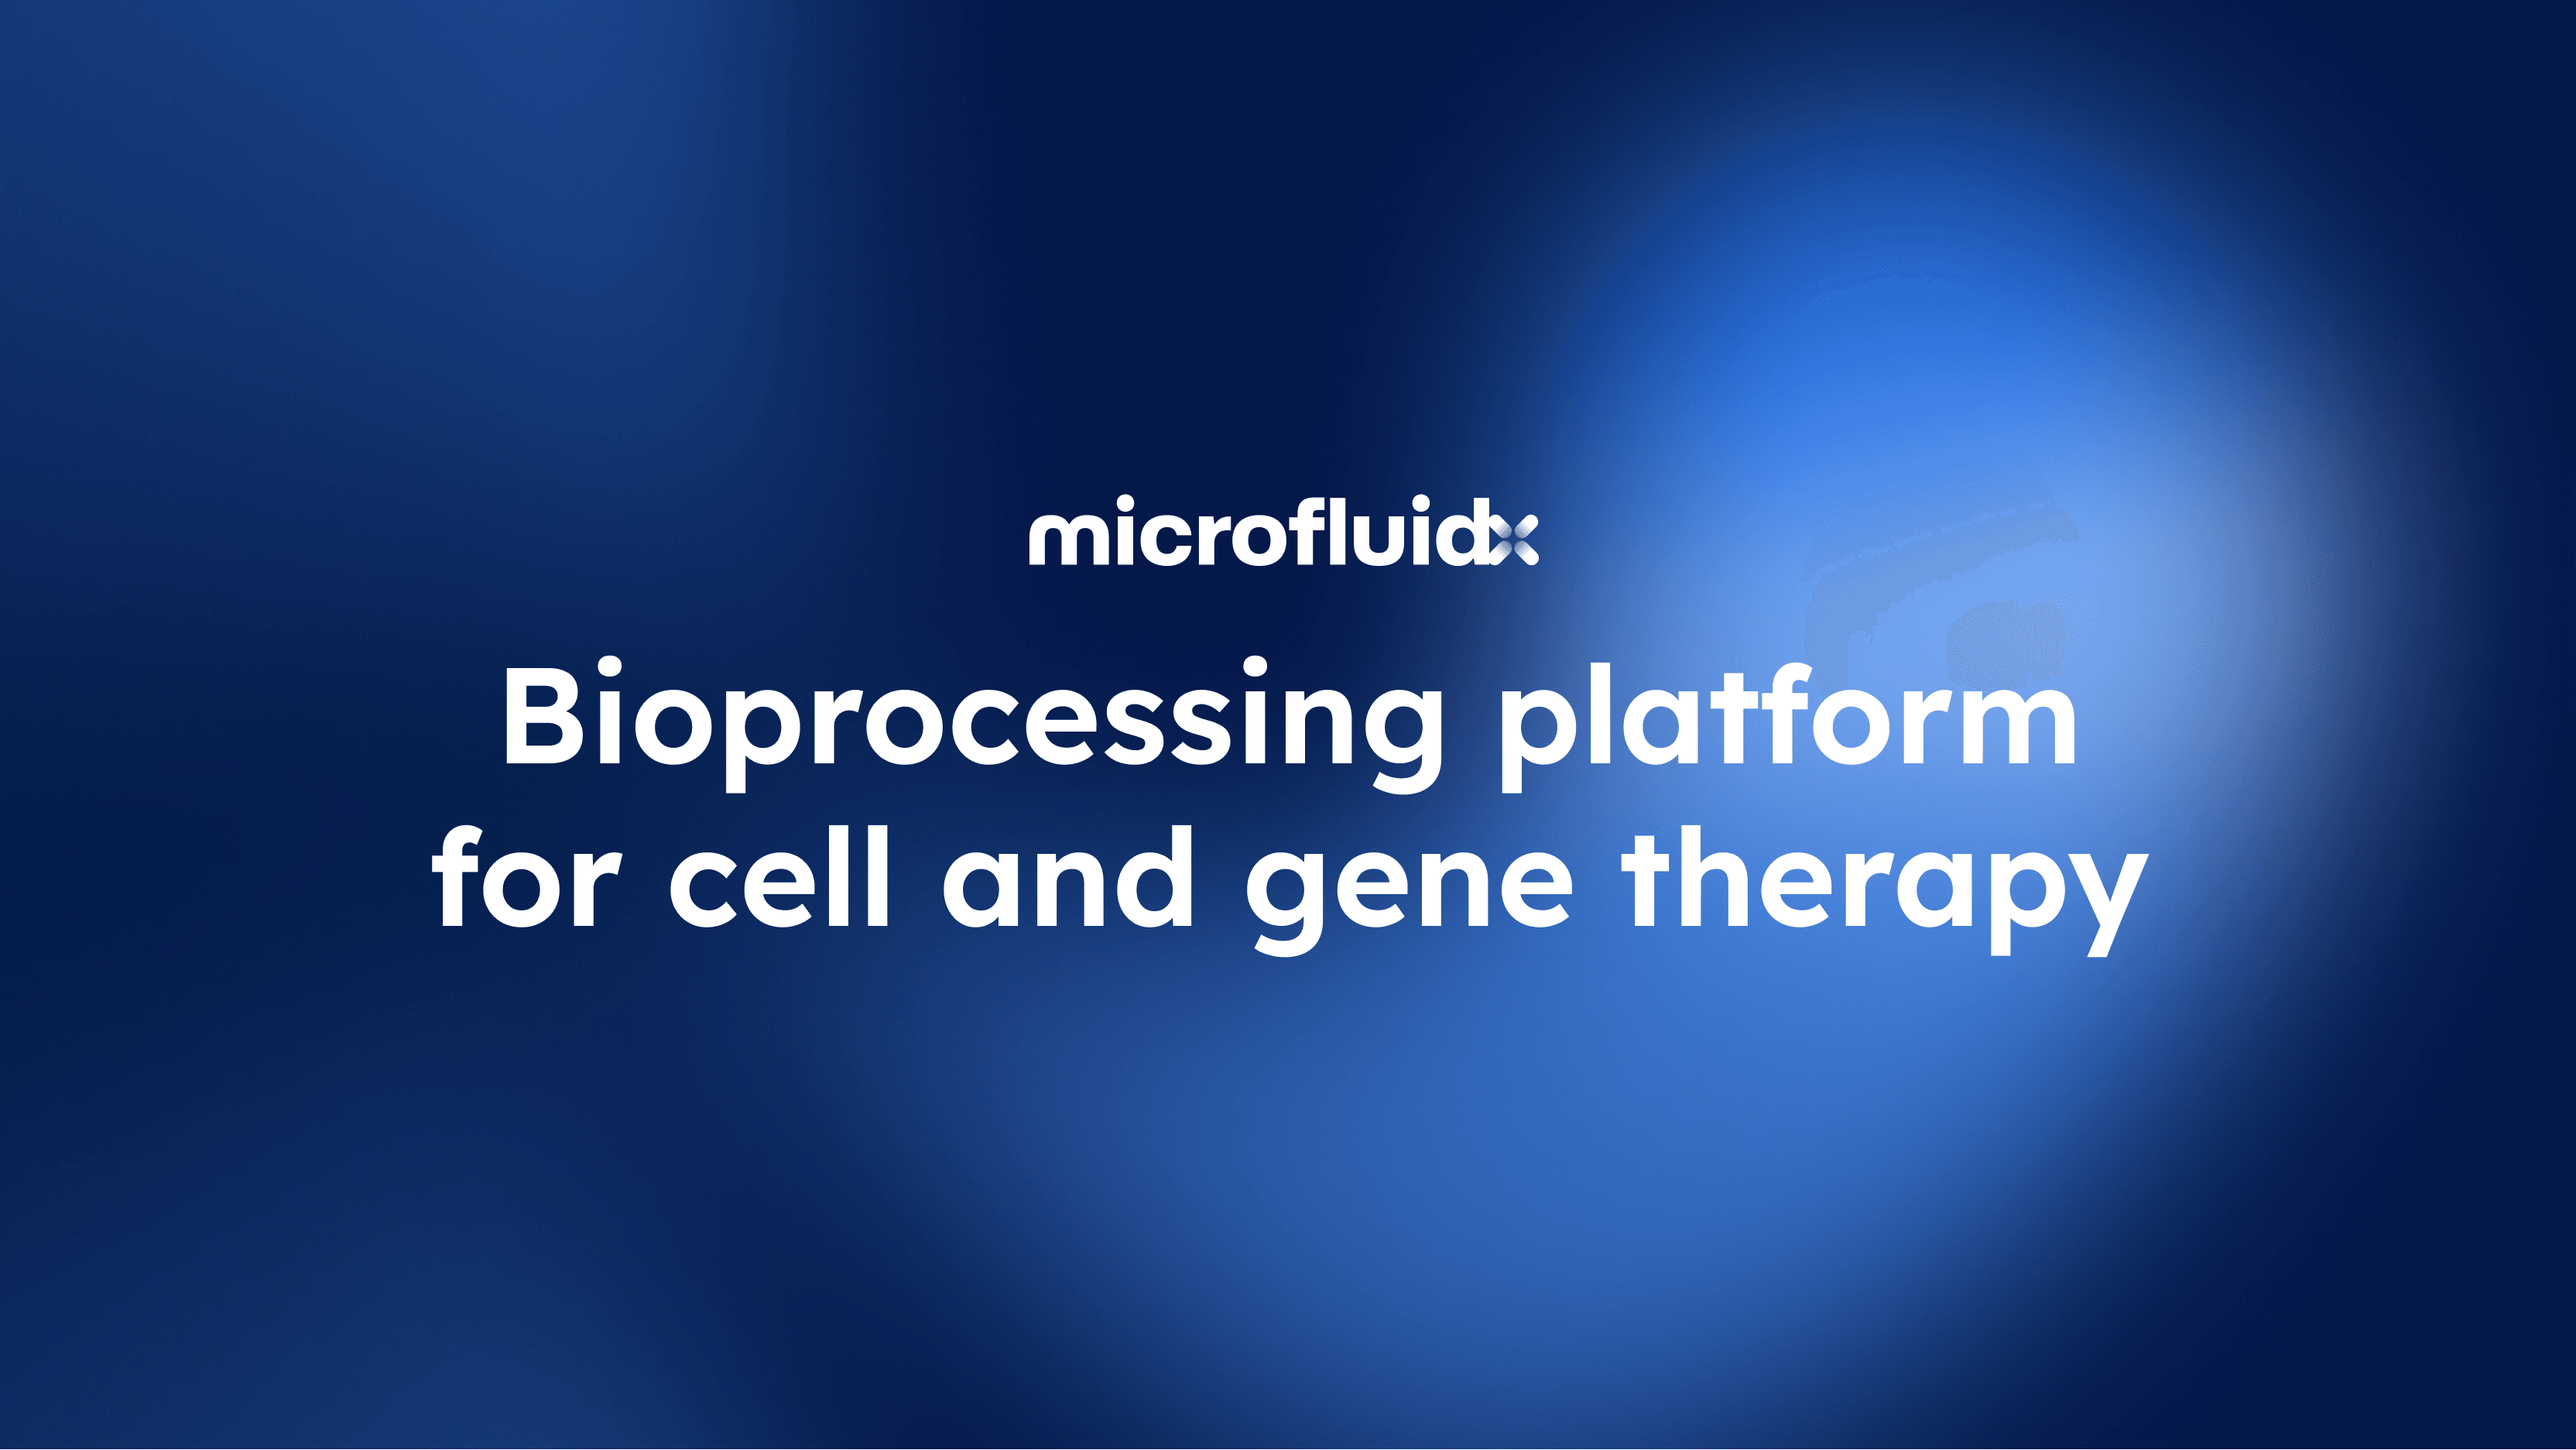 MFX Bioprocessing platform for cell and gene therapy image 